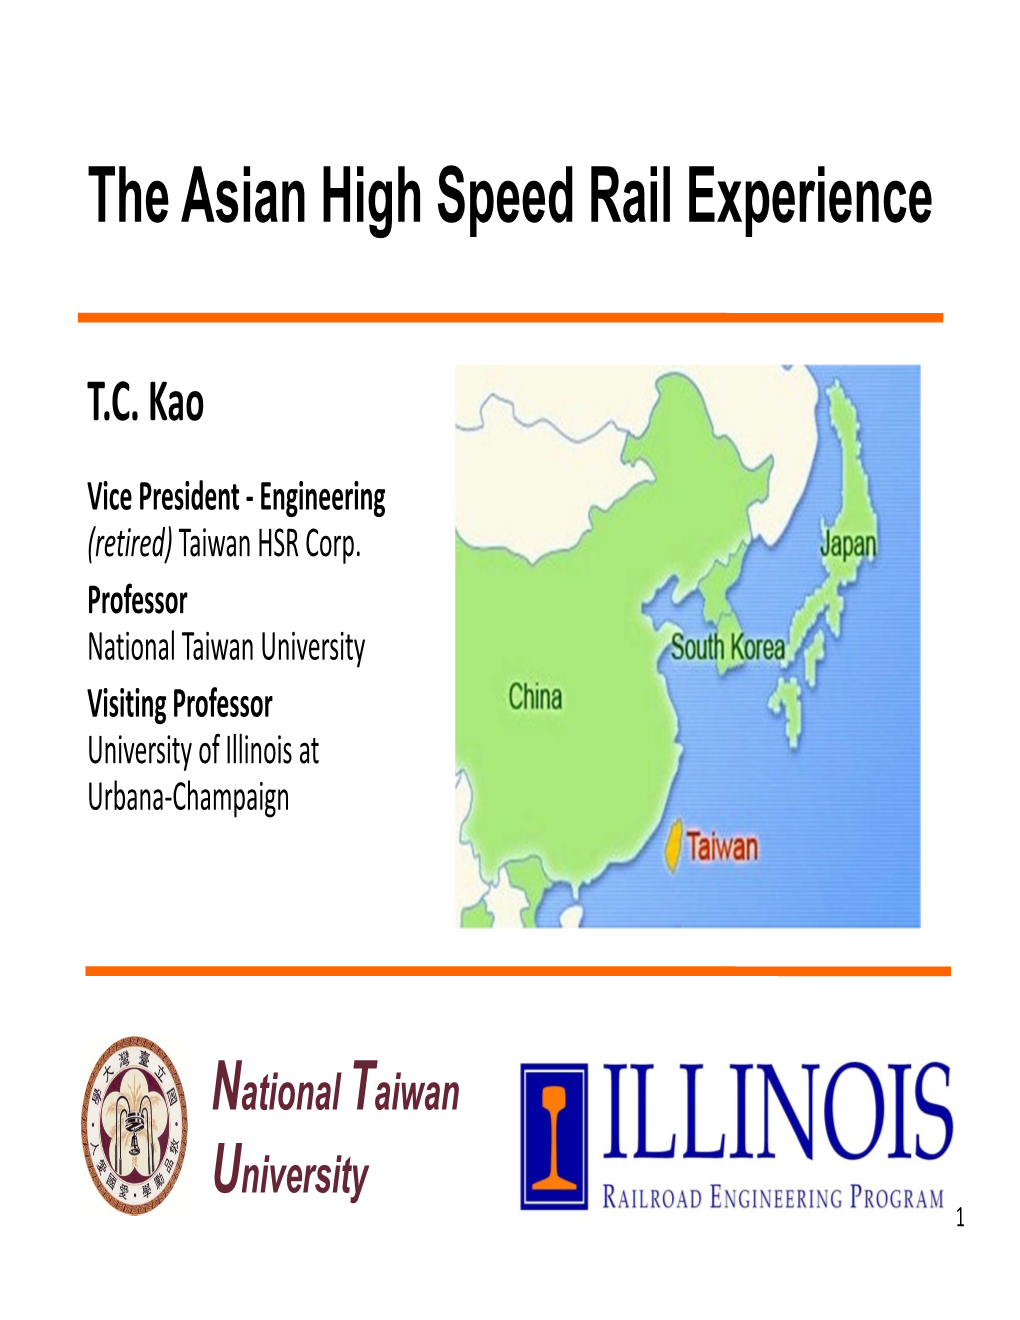 The Asian High Speed Rail Experience